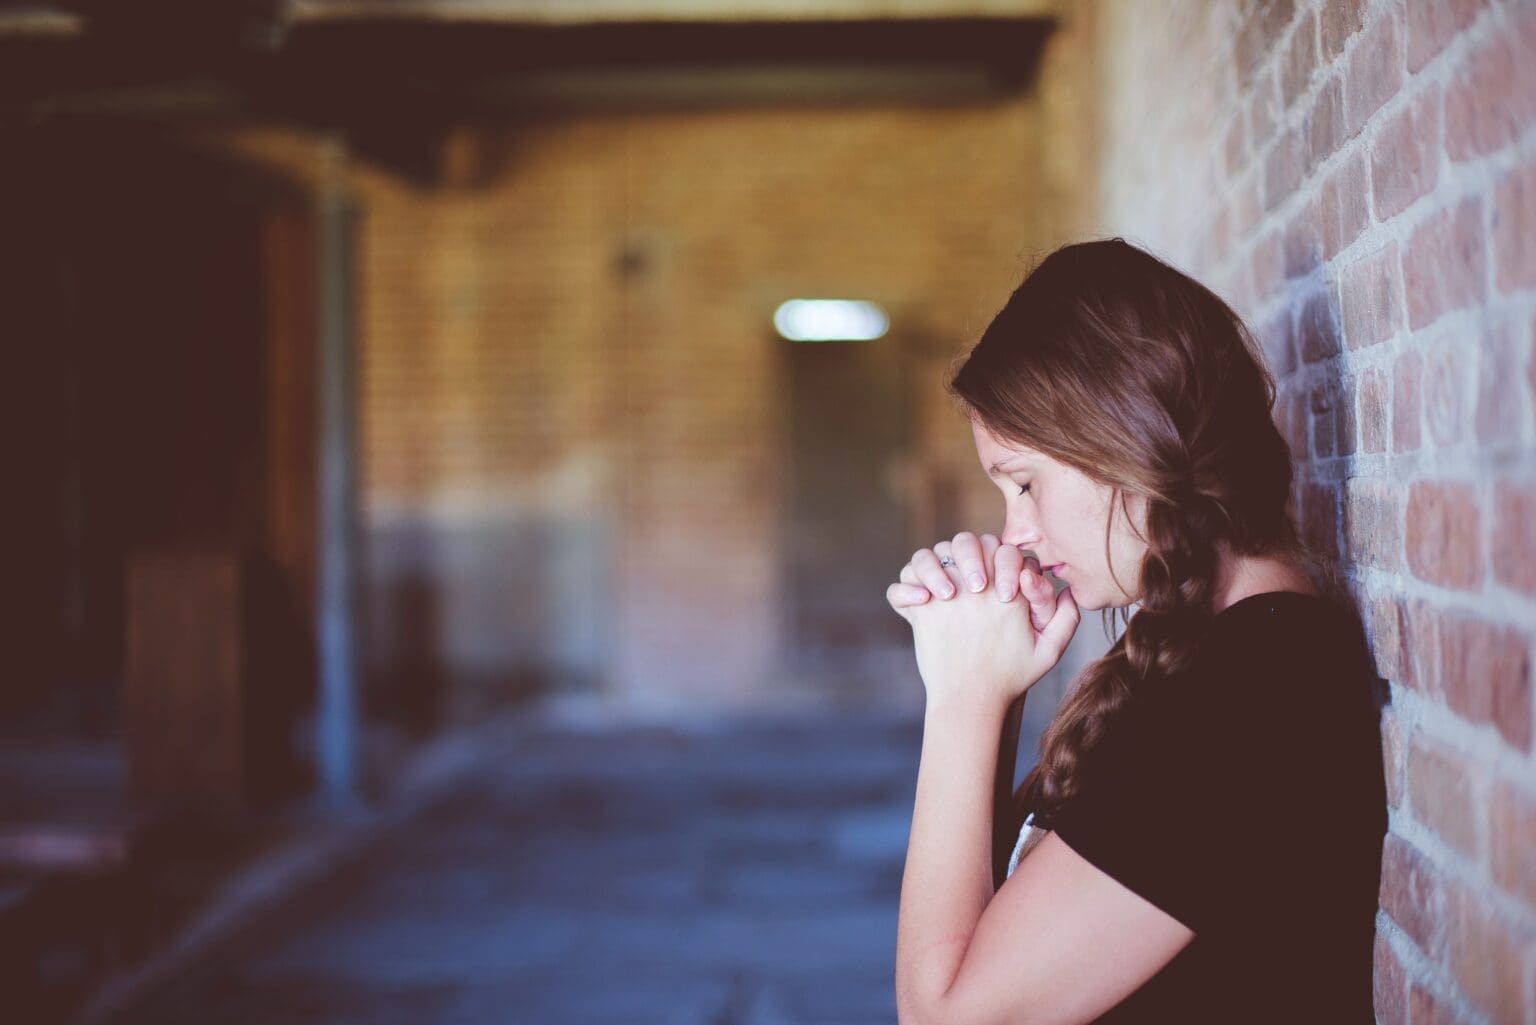 Woman standing with her back against a wall. Her eyes are closed and she is holding her hands to her face in a prayer position.